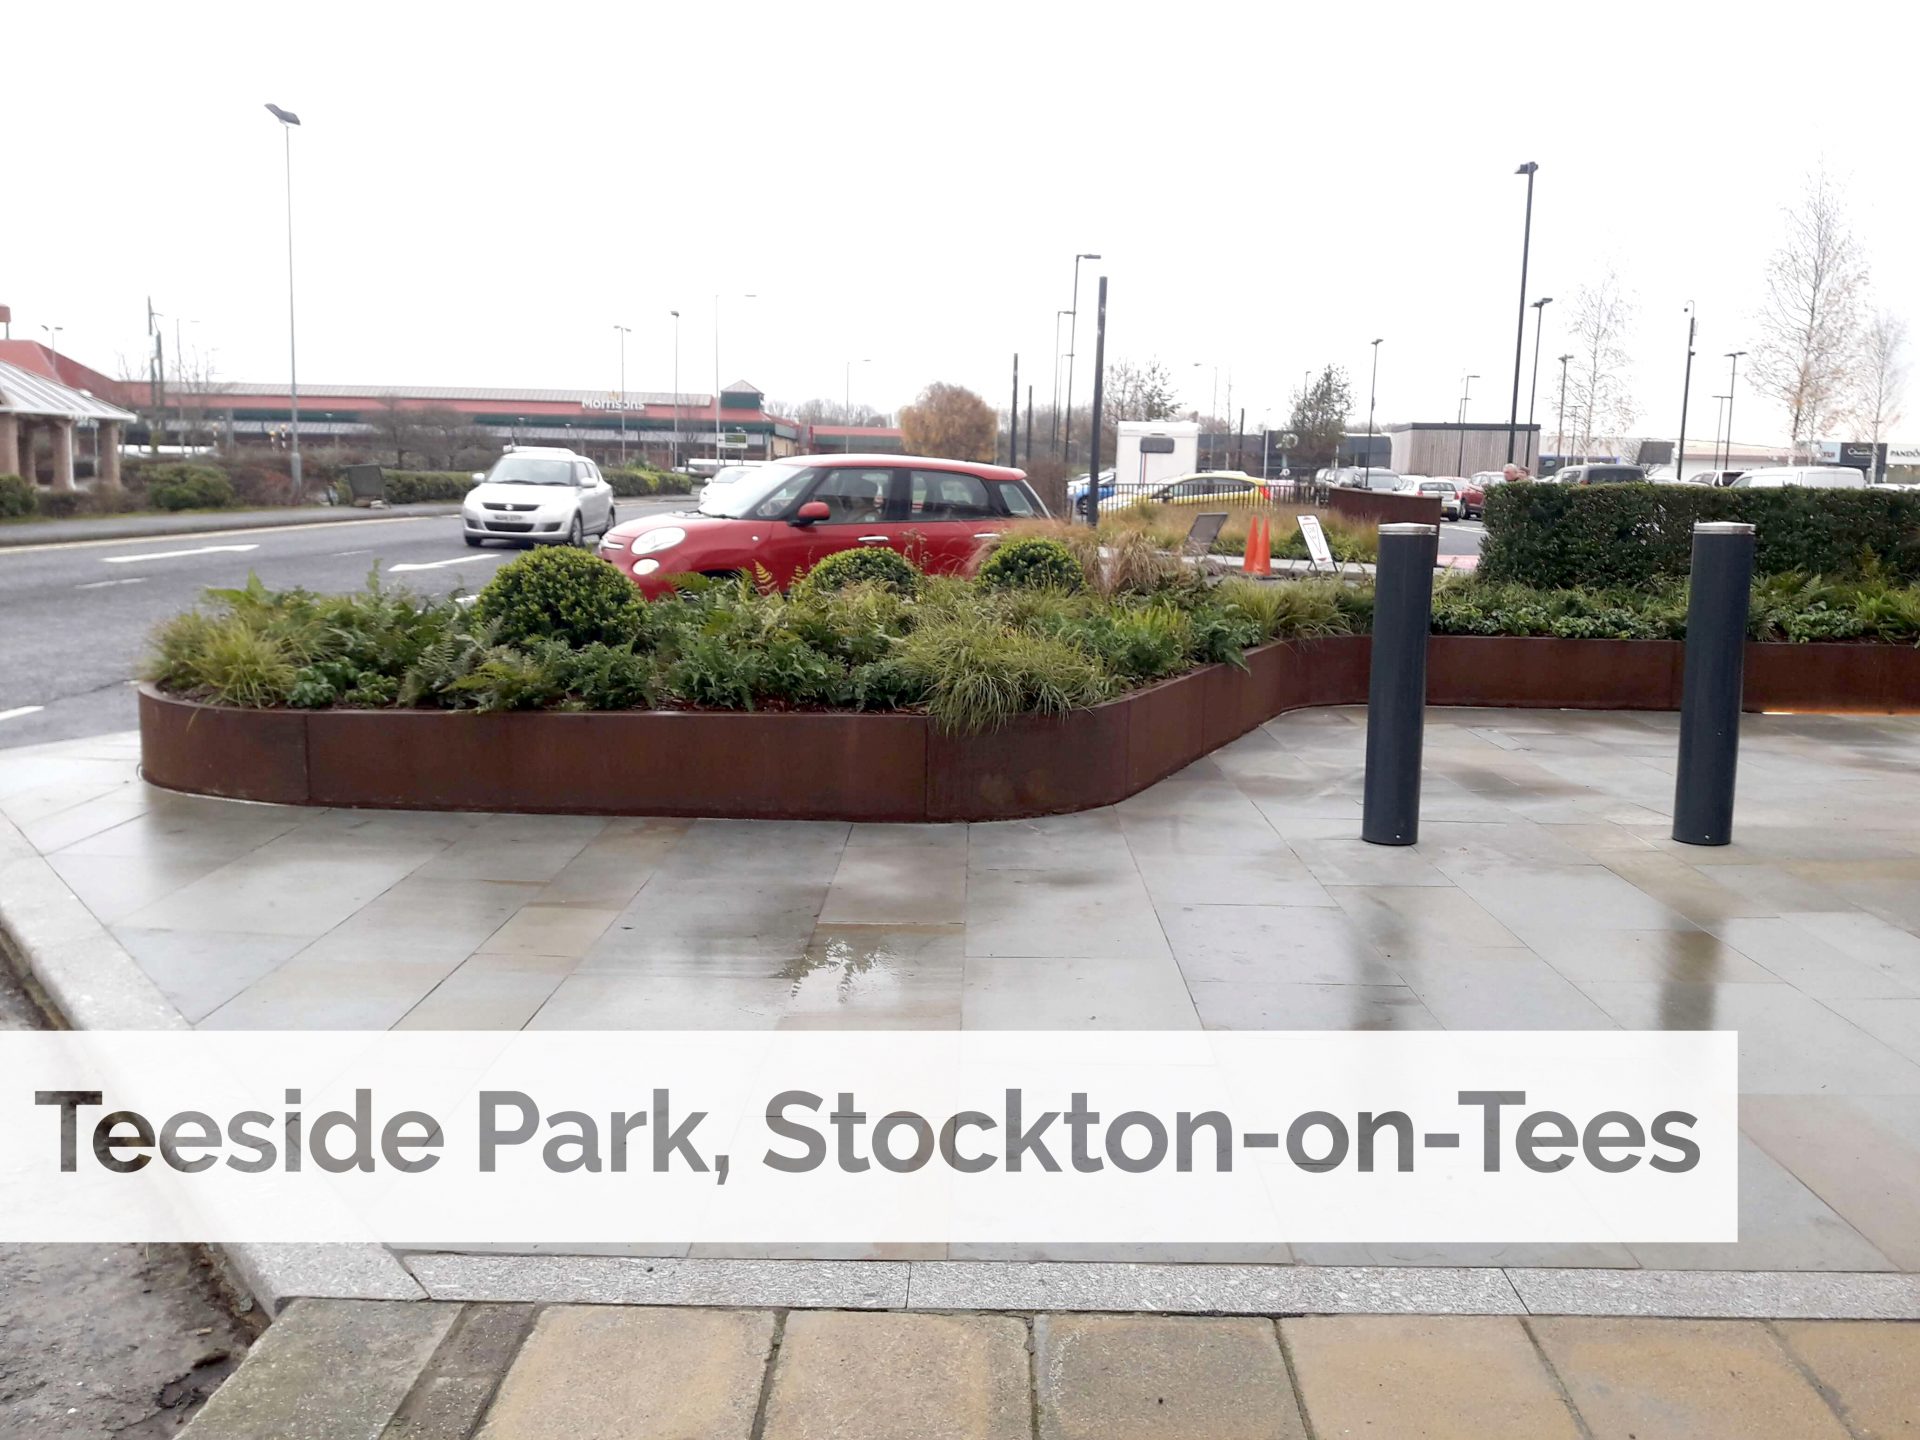 Plant supply to help create green oasis at Teeside Park